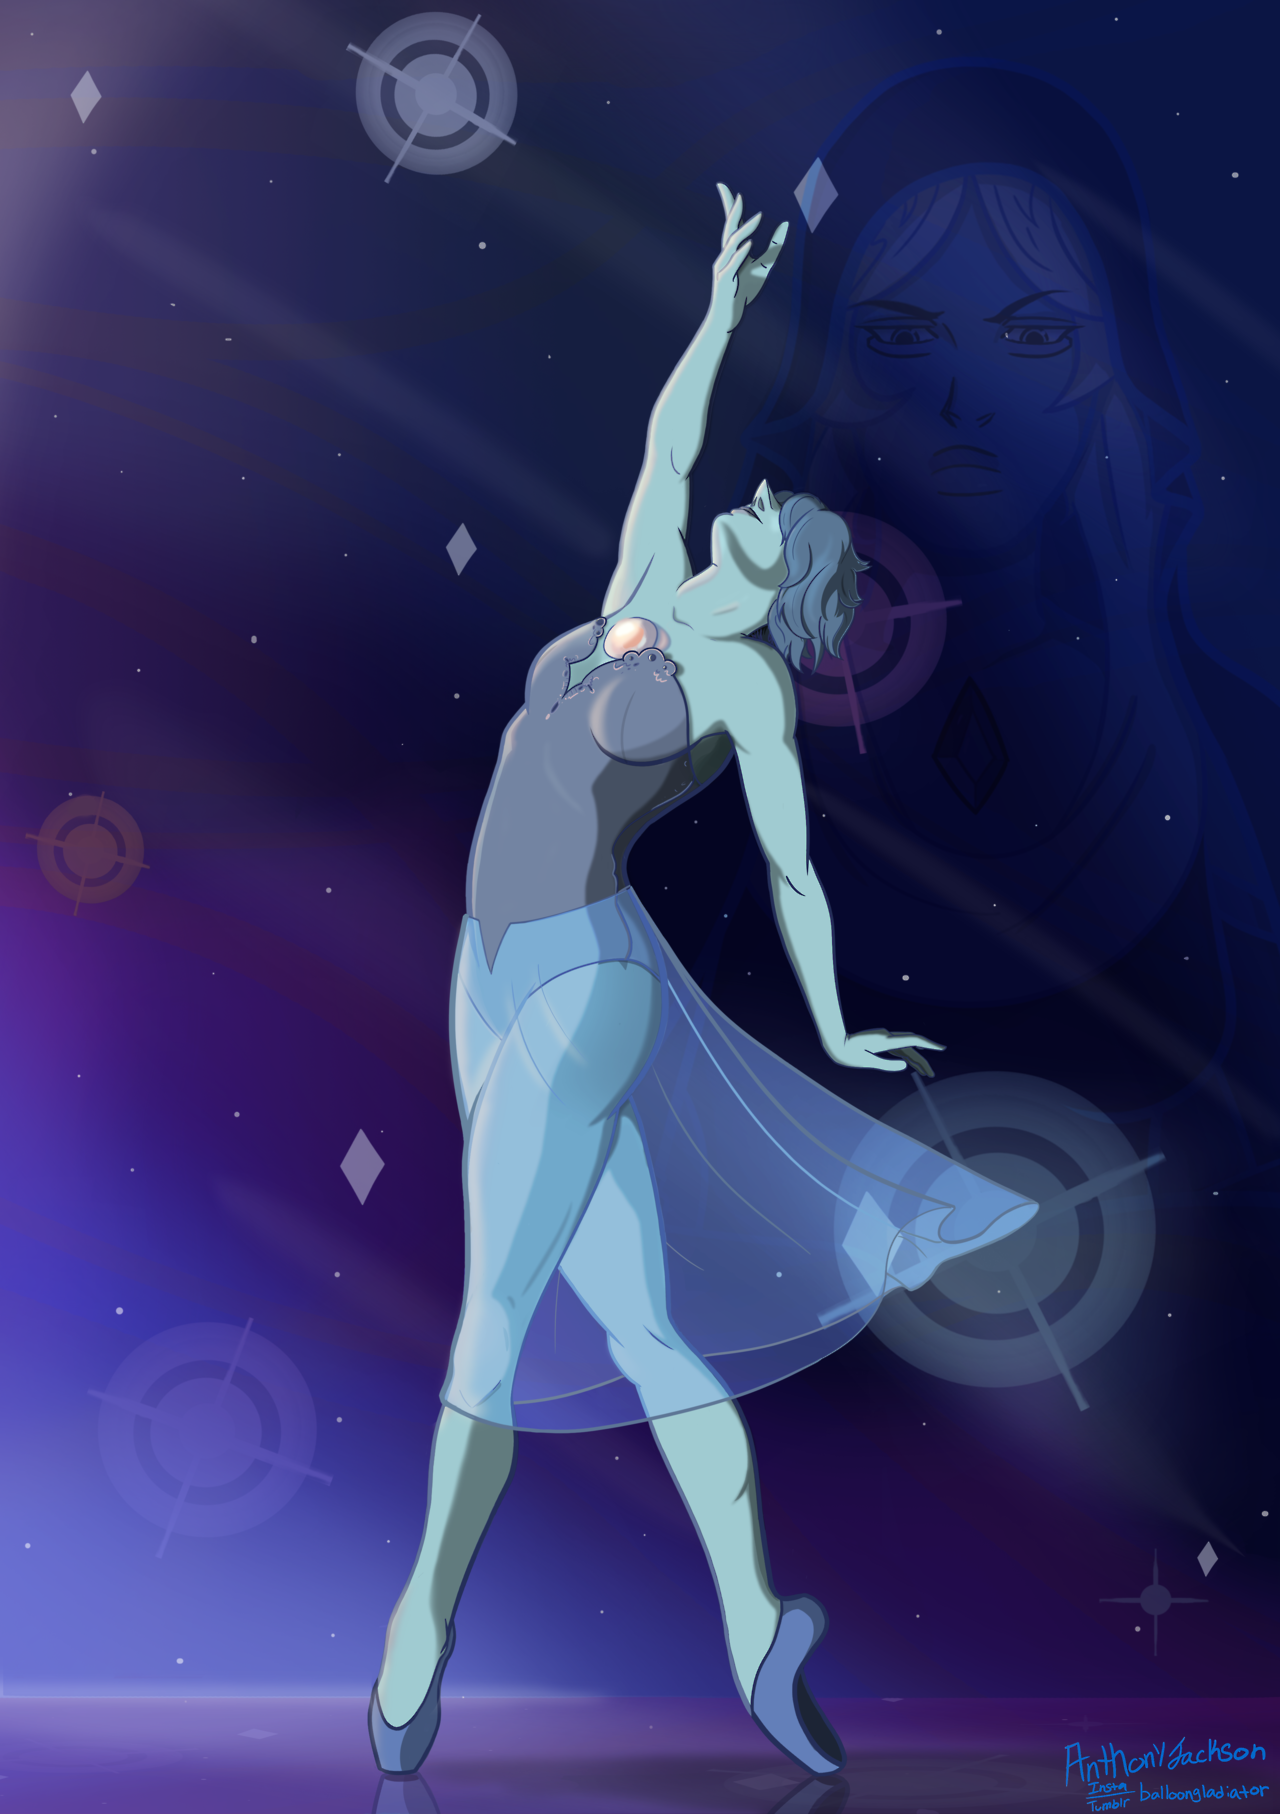 So i FINALLY finished my Blue Pearl Drawing. I would’ve finished a little bit earlier, but i had to take one last look before finalizing it. And noticed that my original background was pretty bad....